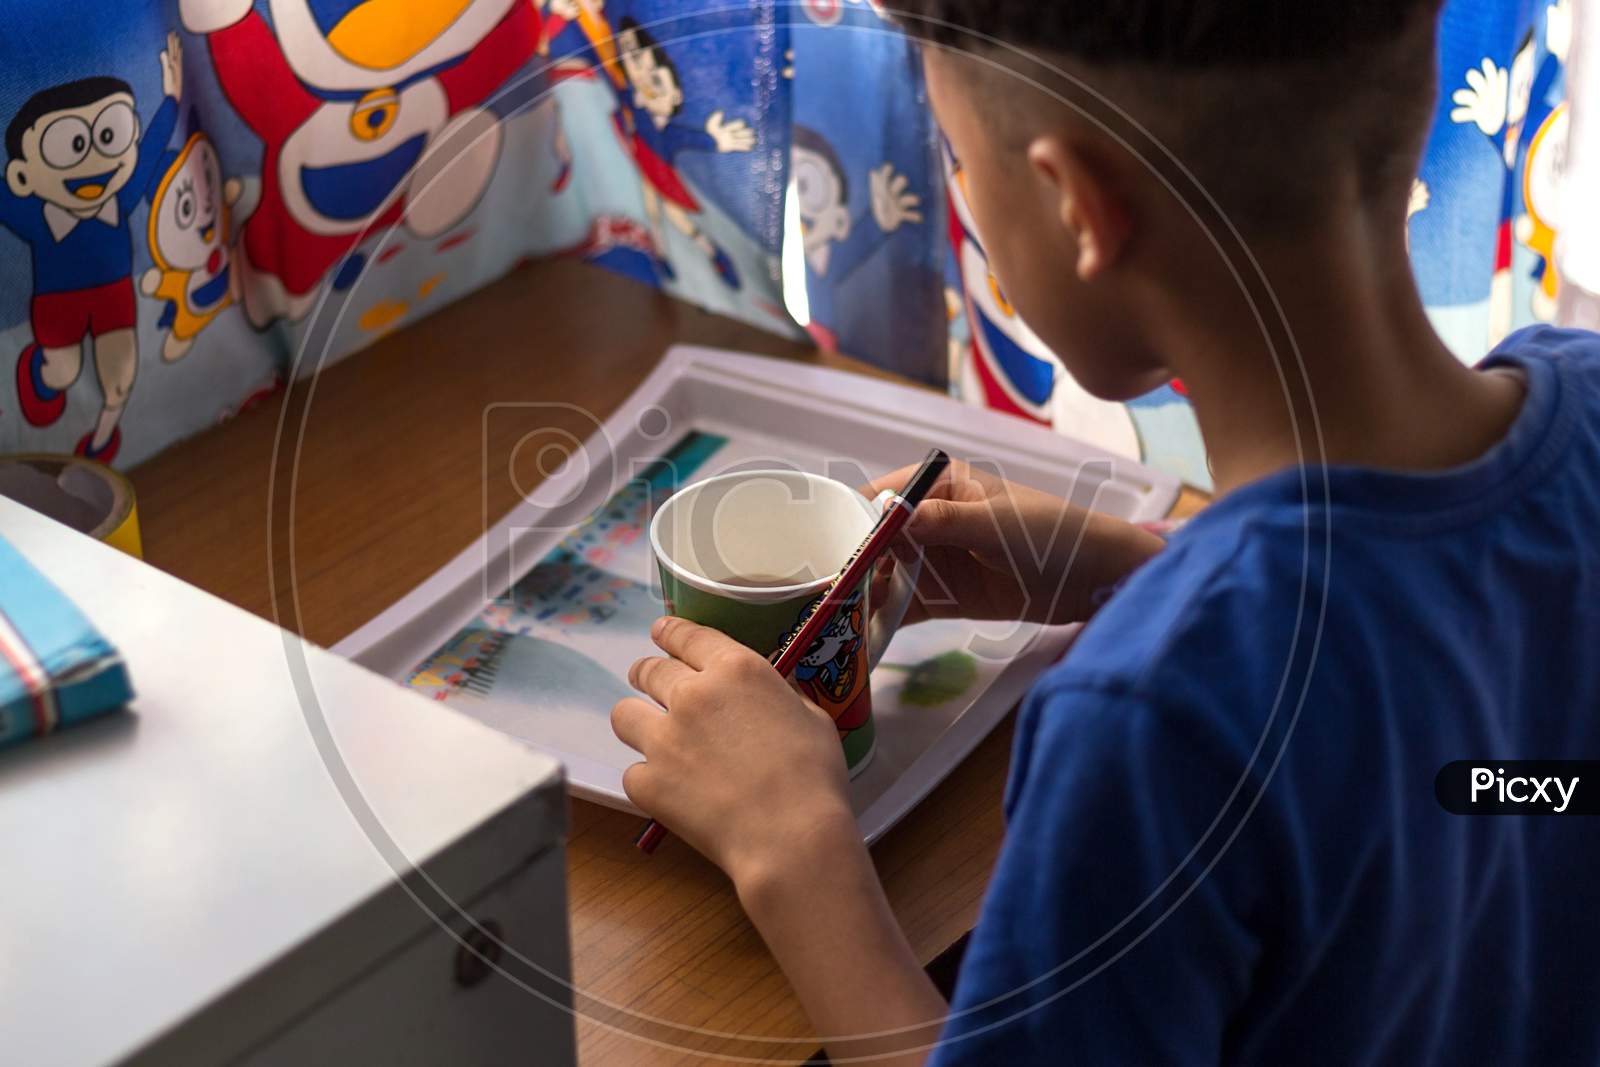 A Kid Having His Morning Breakfast Meal Of Chocolate Flavor Milk In A Cup.